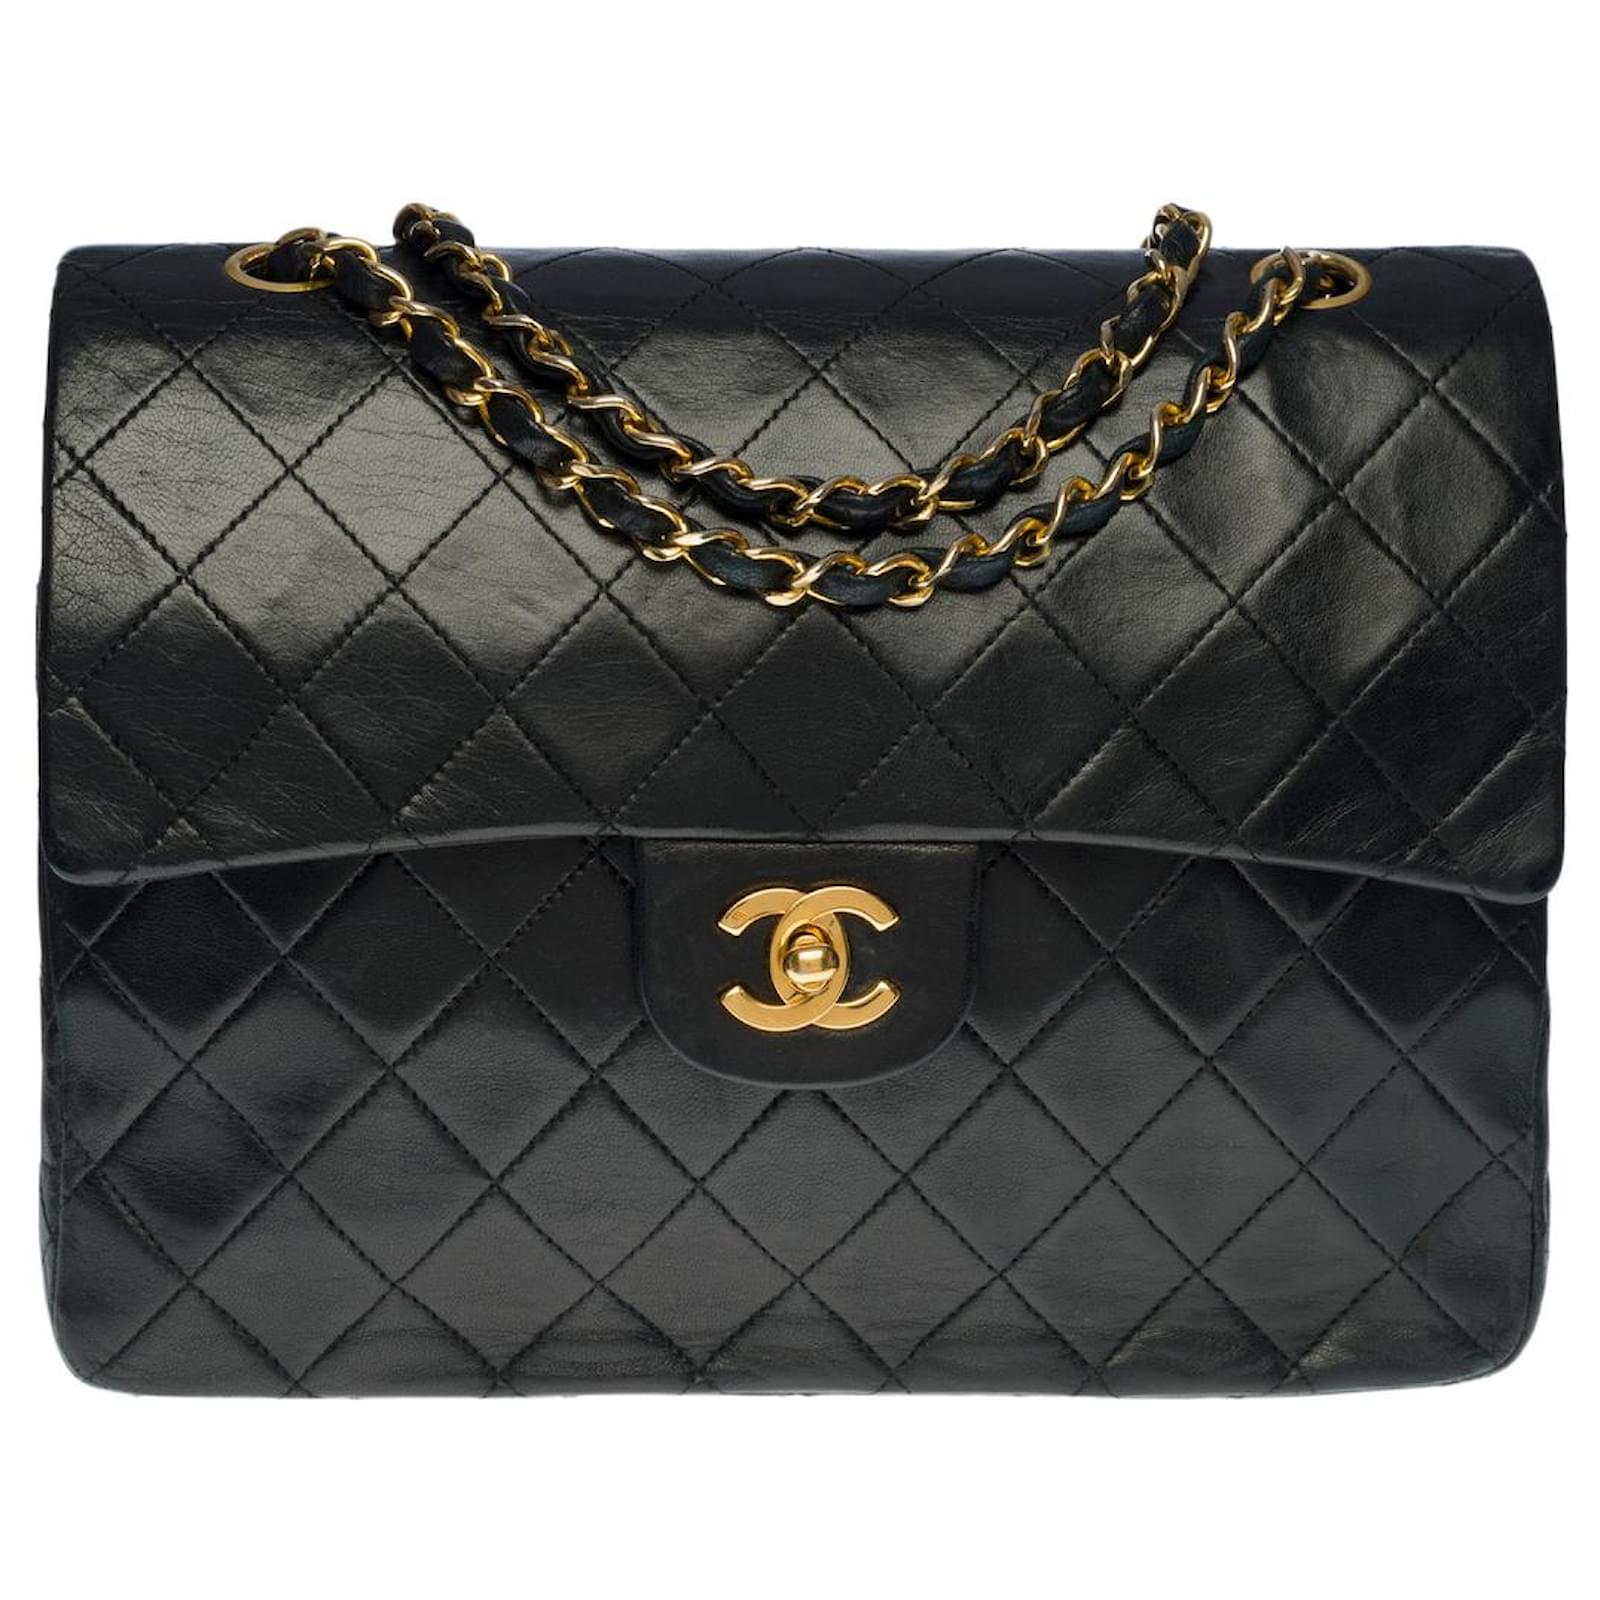 Handbags Chanel Timeless Crossbody bag/CLASSIC Lined Flap in Black Quilted Lamb LEATHER-100536